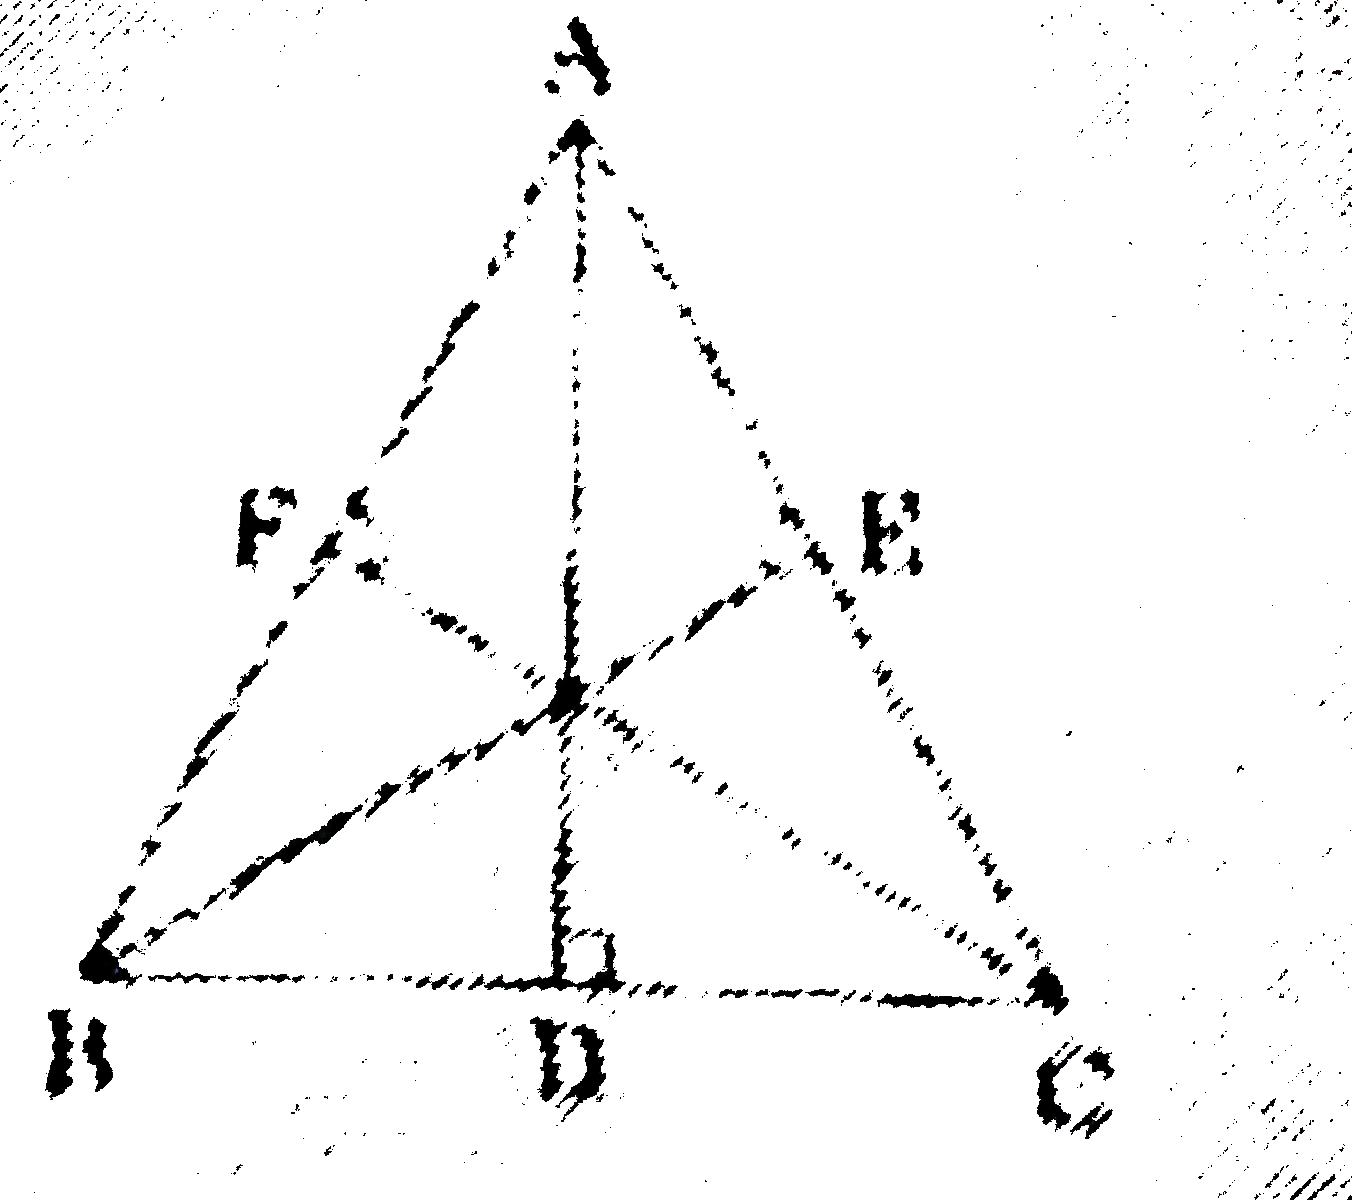 In figure - 6 in an equilateral triangle ABC, AD|BC, BE|AC and CF|AB. Prove that 4(AD^(2)+BE^(2)+CF^(2))=9AB^(2)